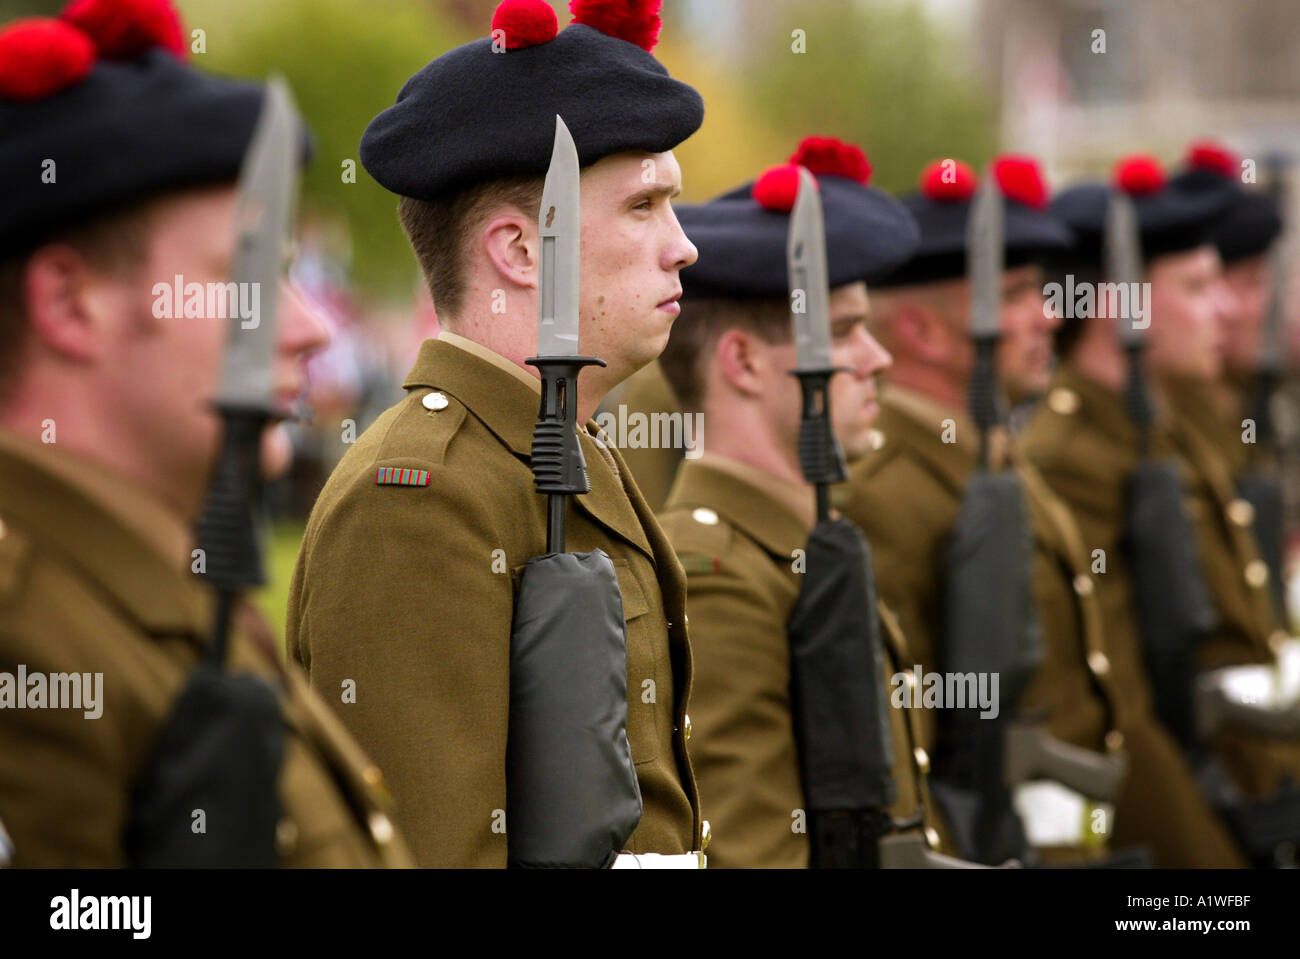 A line of Scottish Soldiers standing to display in uniform red and gun Stock Photo - Alamy